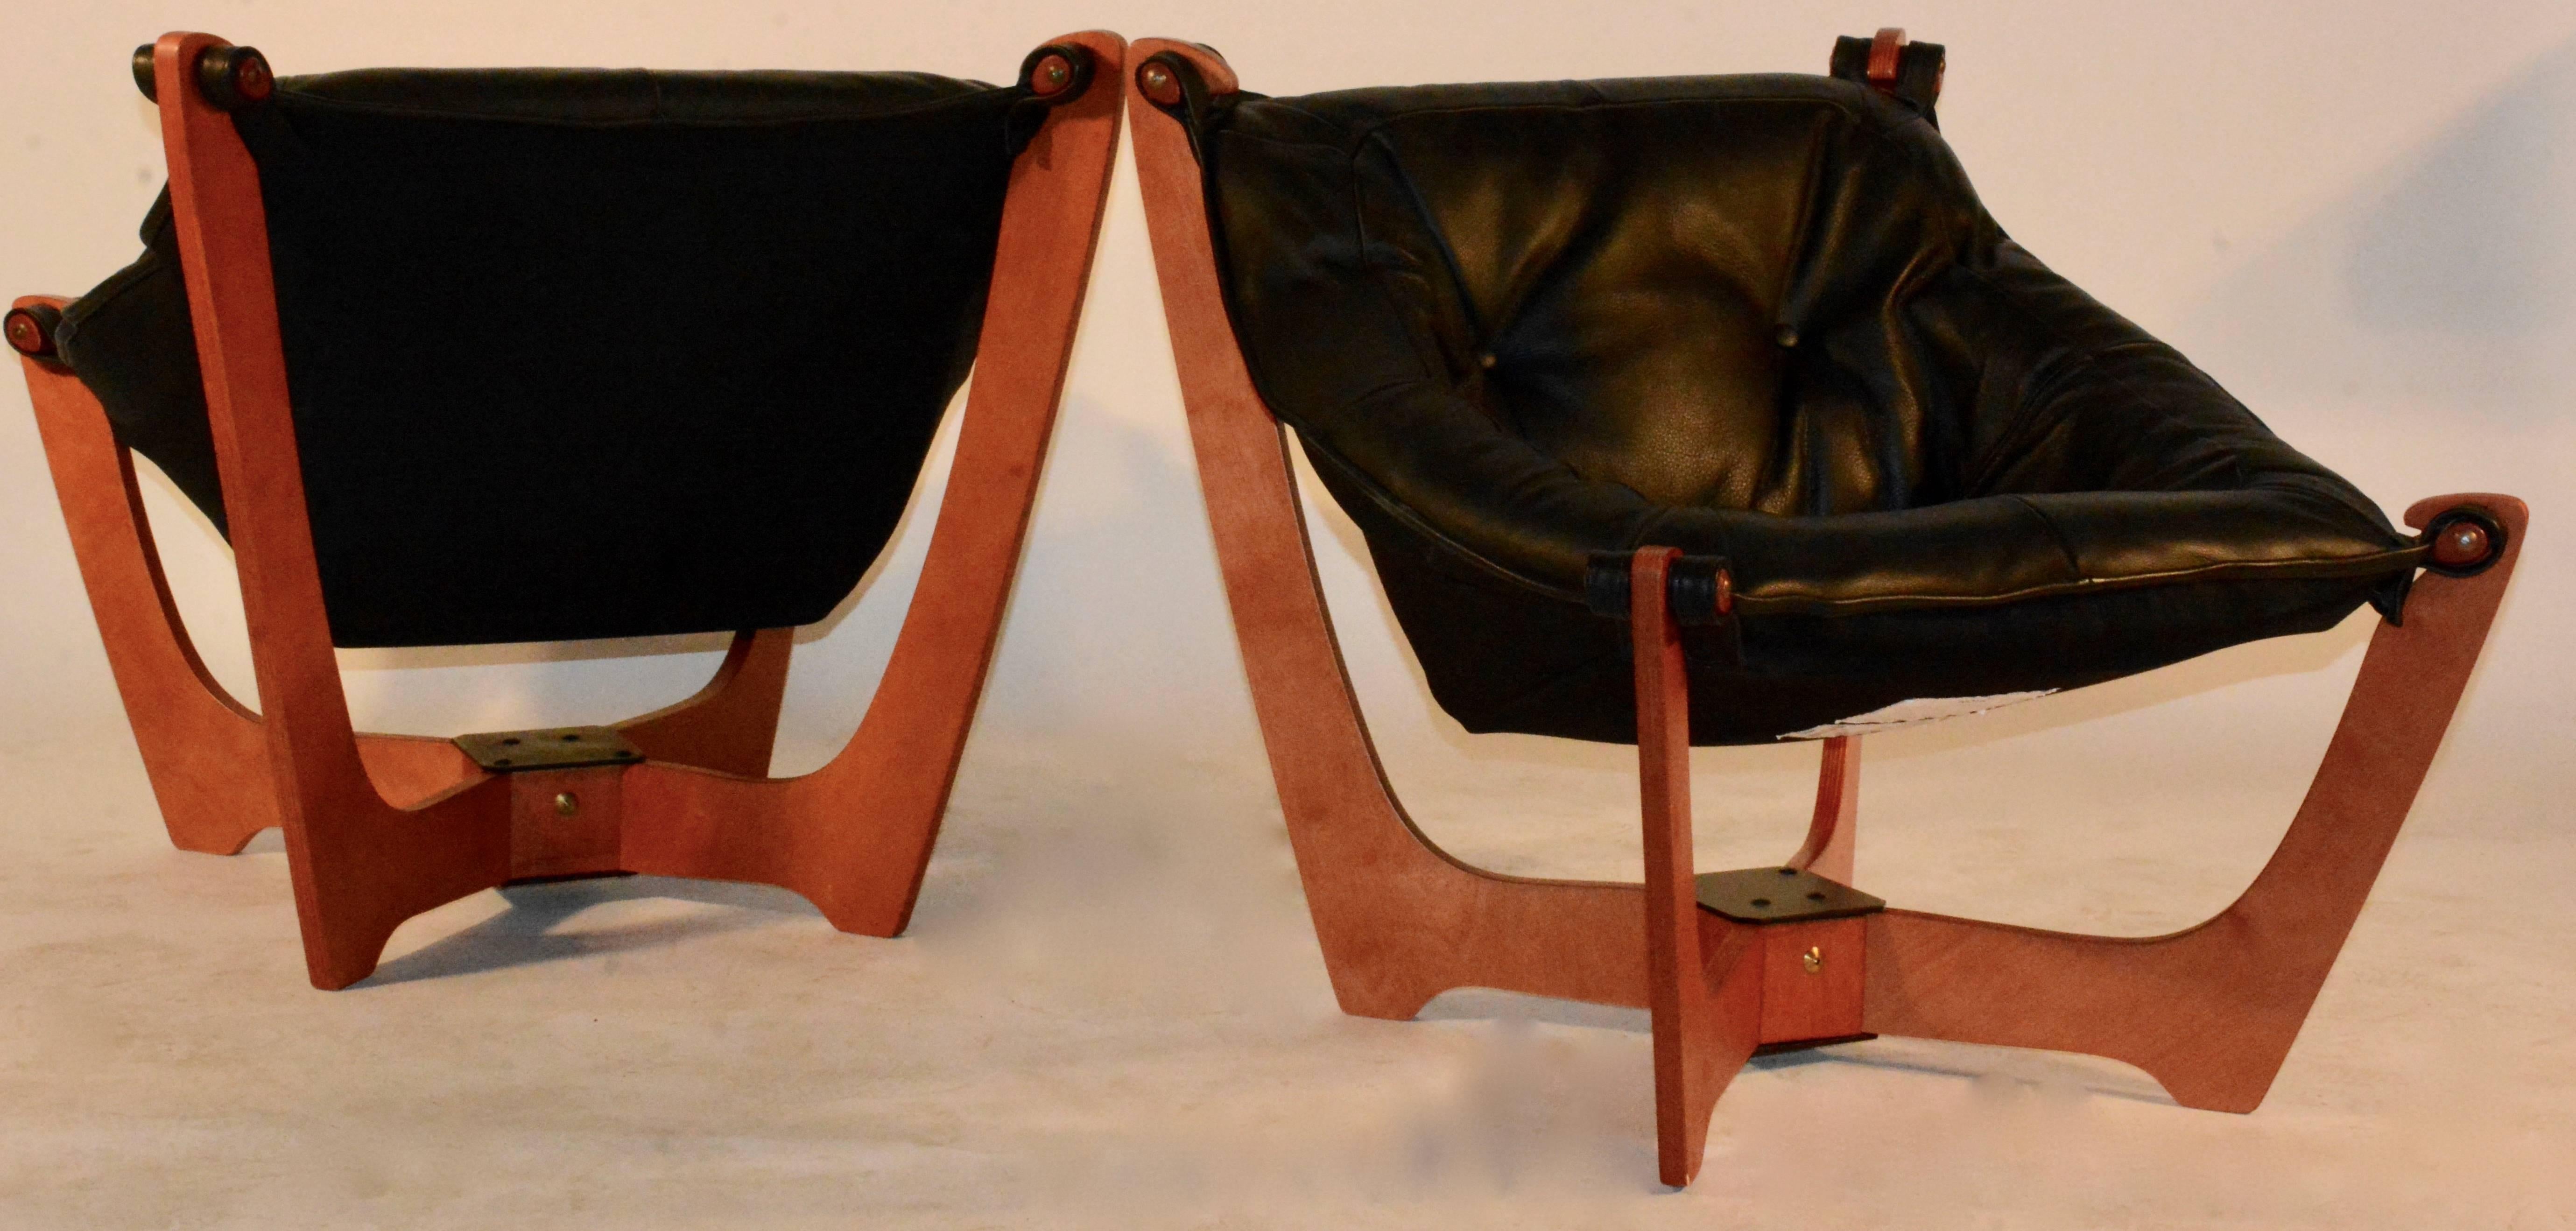 This pair of Luna sling chairs are made of birch plywood with a warm natural tone. The four legs come out of a square base on an angle with soft curves leading upward. The seating is covered in black leather and attaches to the legs with a knob like